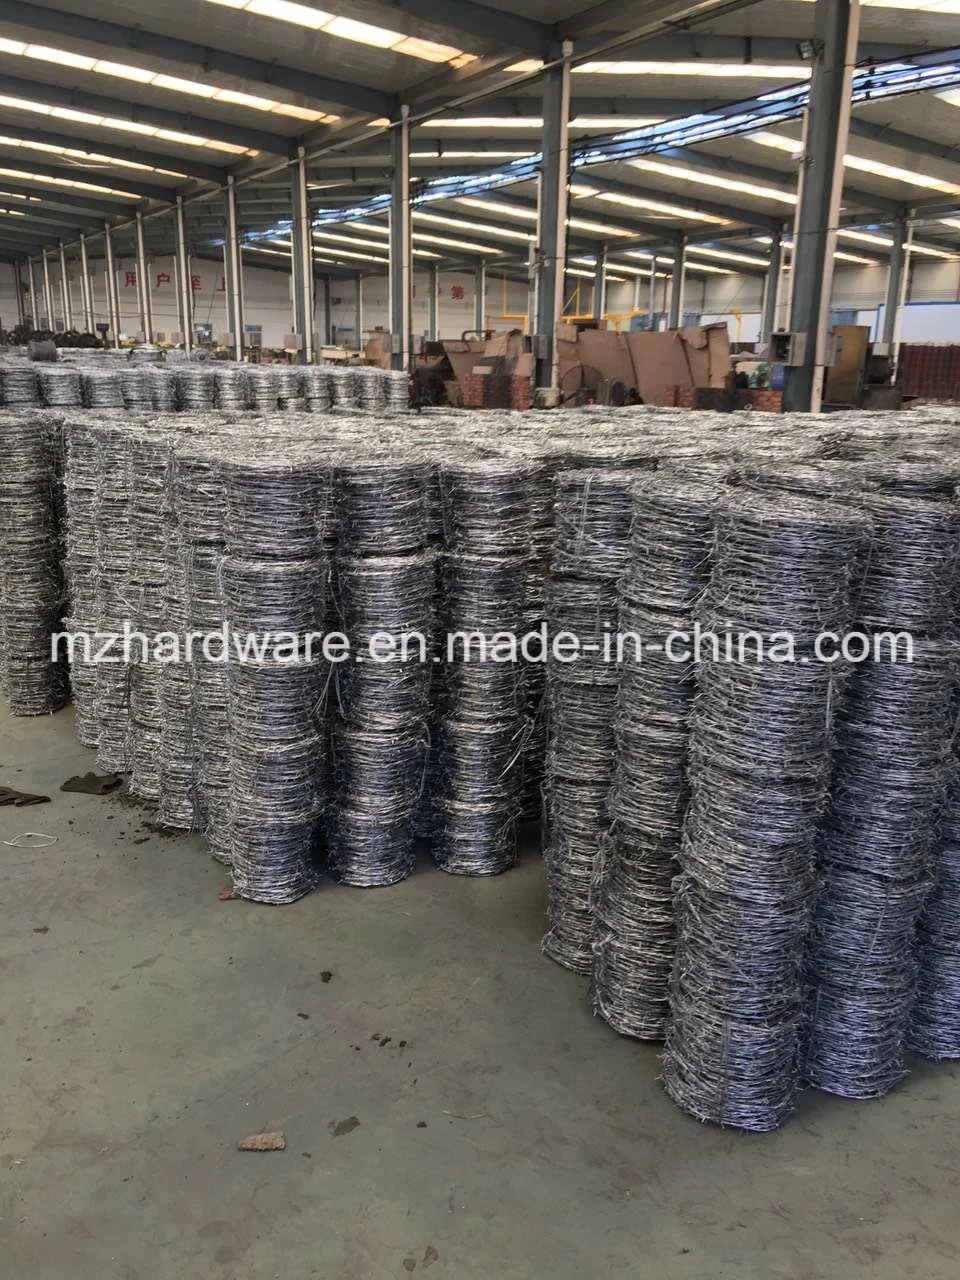 100m 200m 300m 400m 500m Electro/Hot Dipped Galvanized and PVC Coated /Stainless Steel Bto-22 Cbt-60 Cbt-65 Concertina Razor Barbed Wire for Farming/Animal